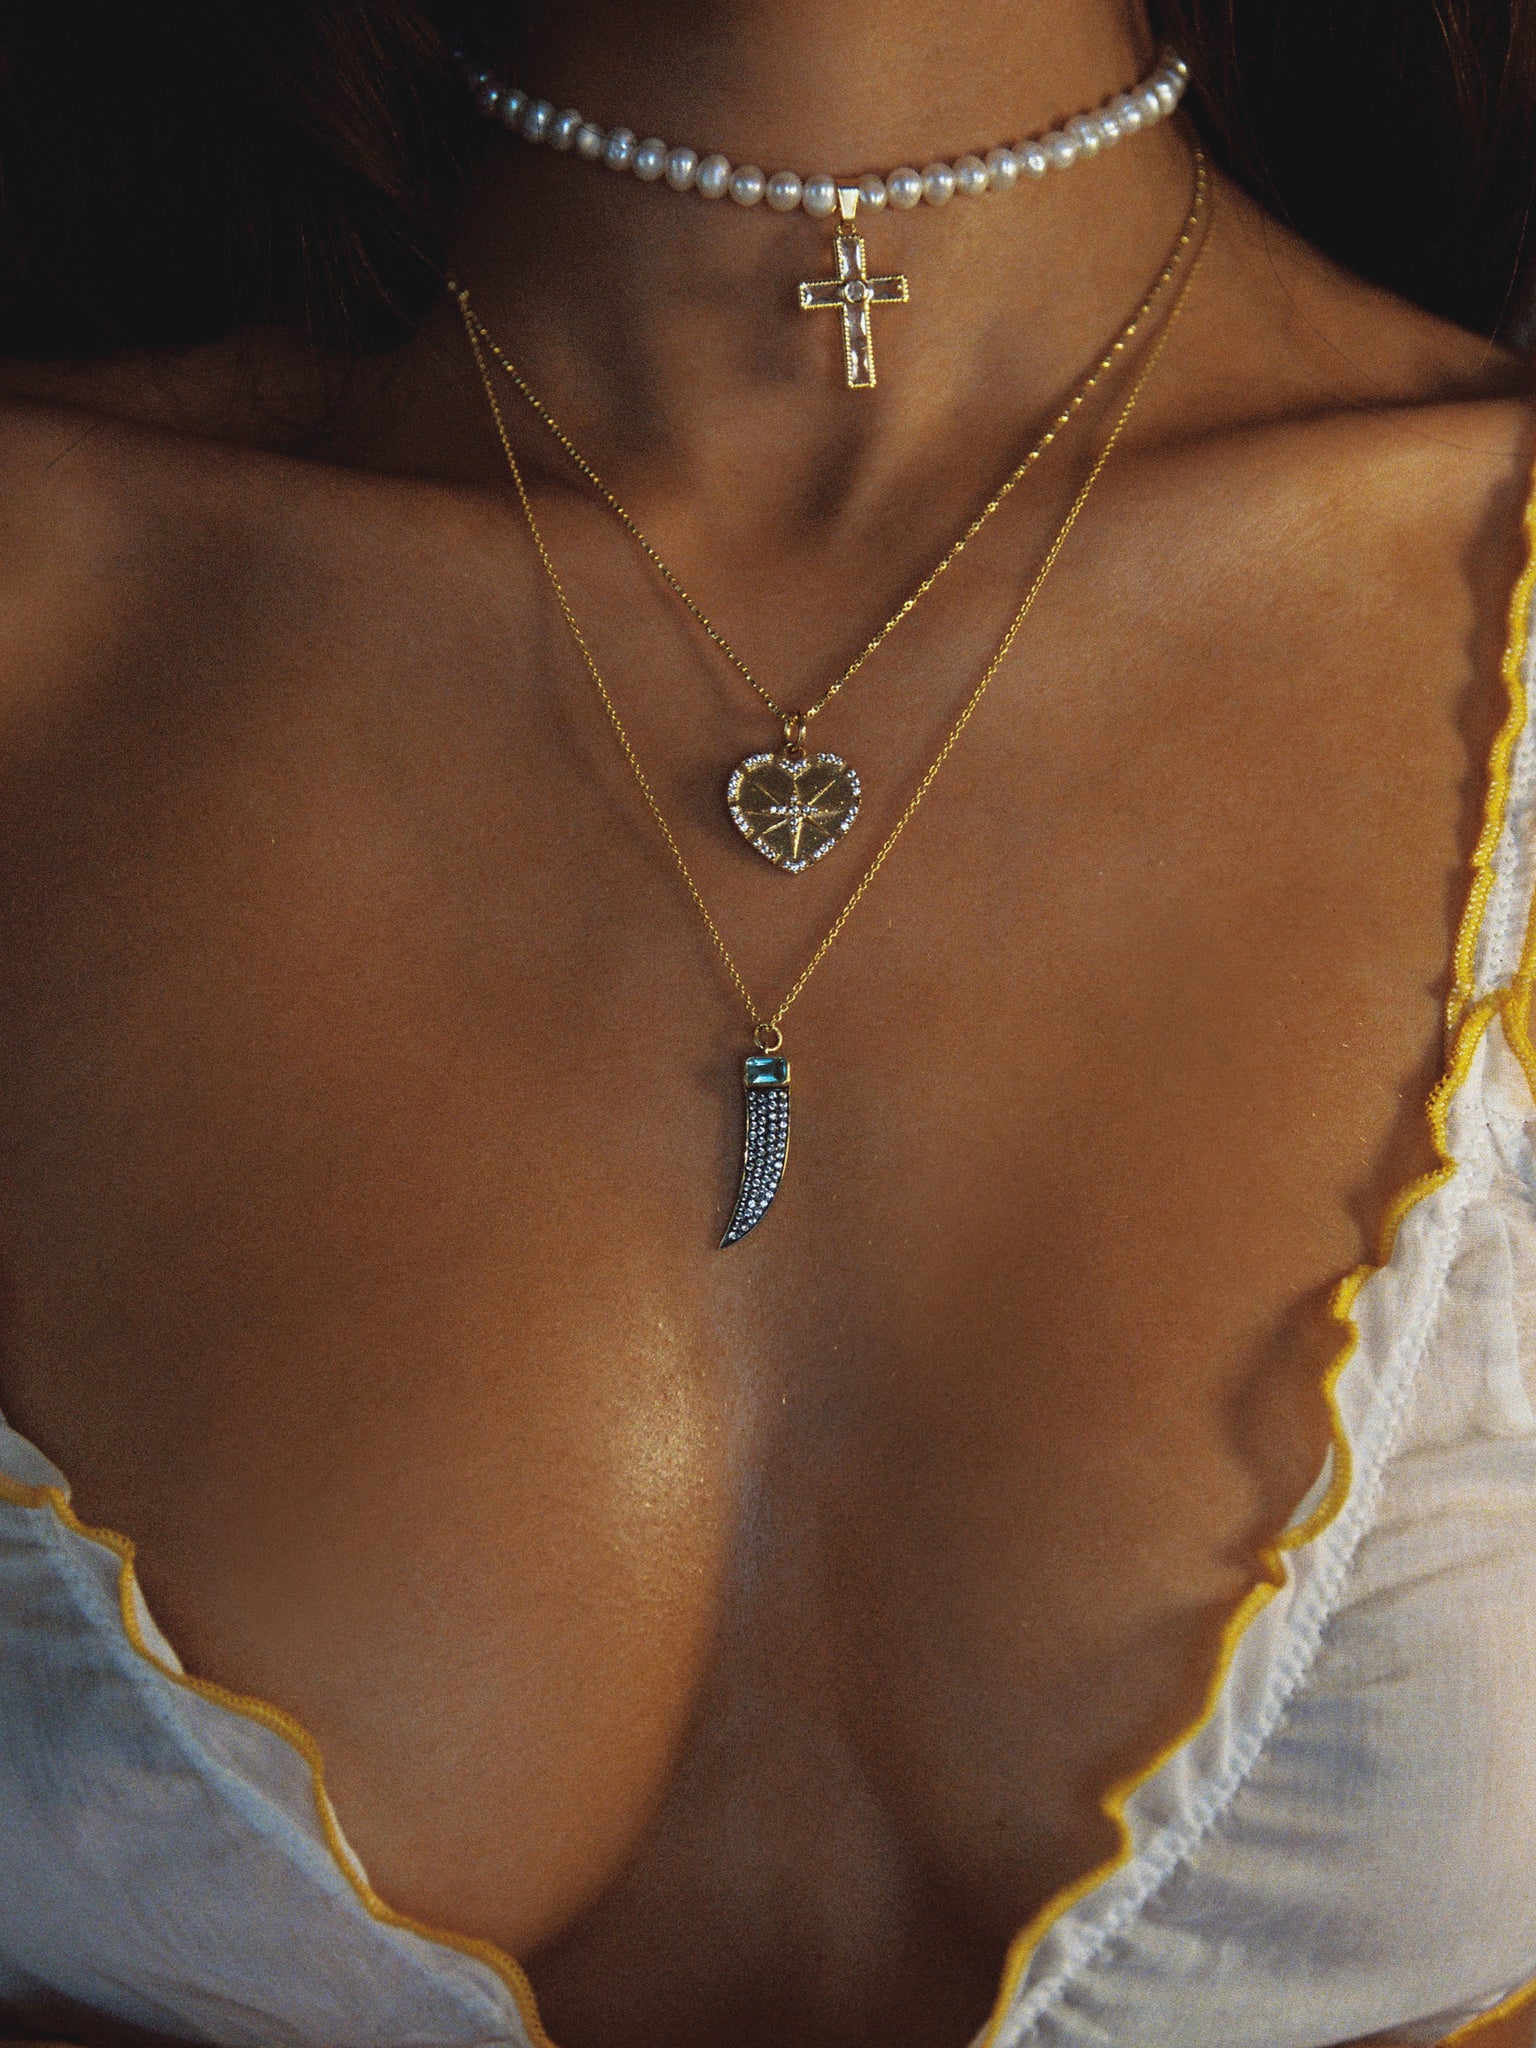 The Esme Heart Necklace